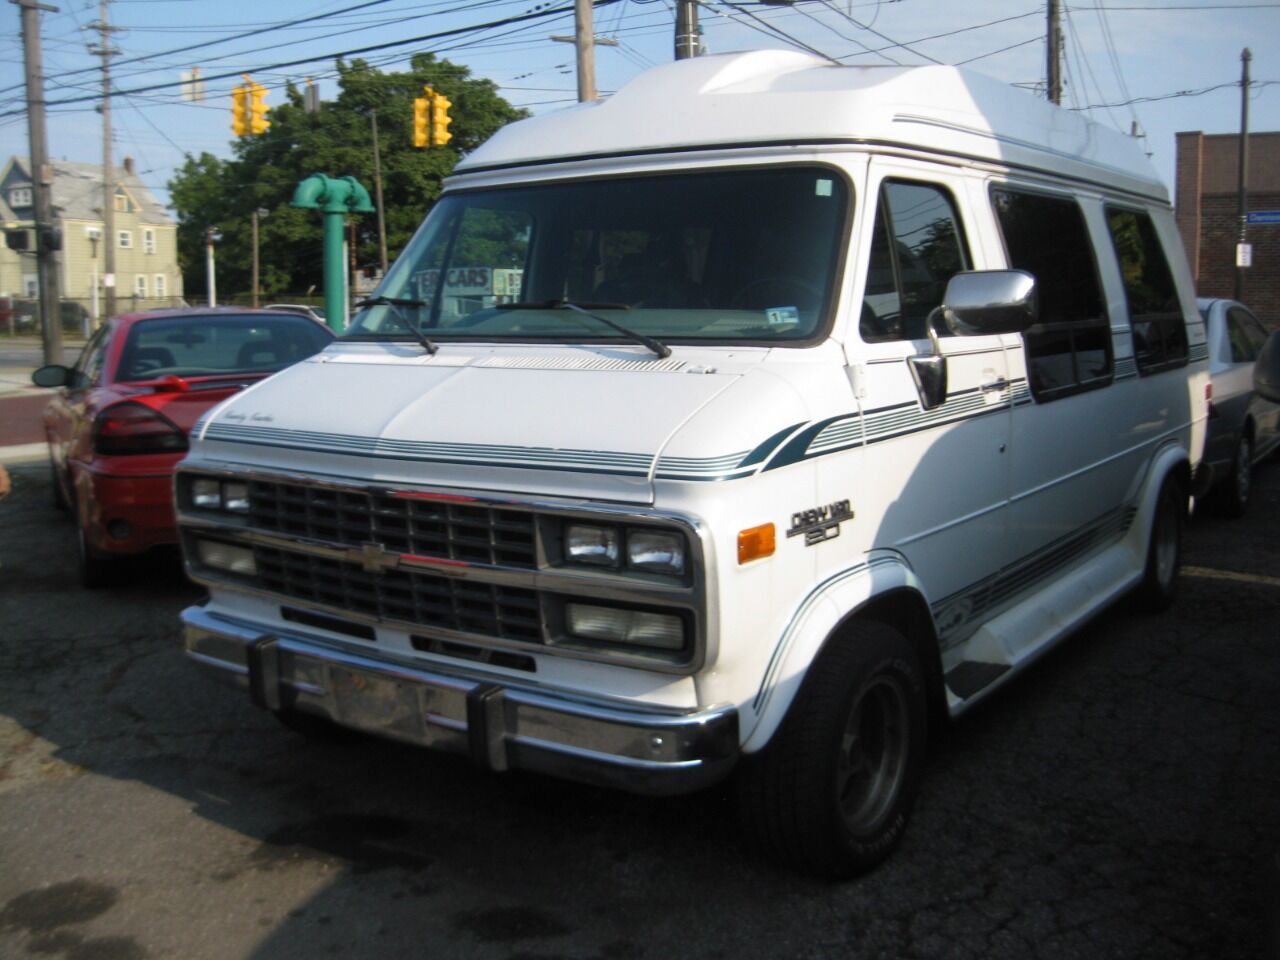 chevy vans for sale by owner